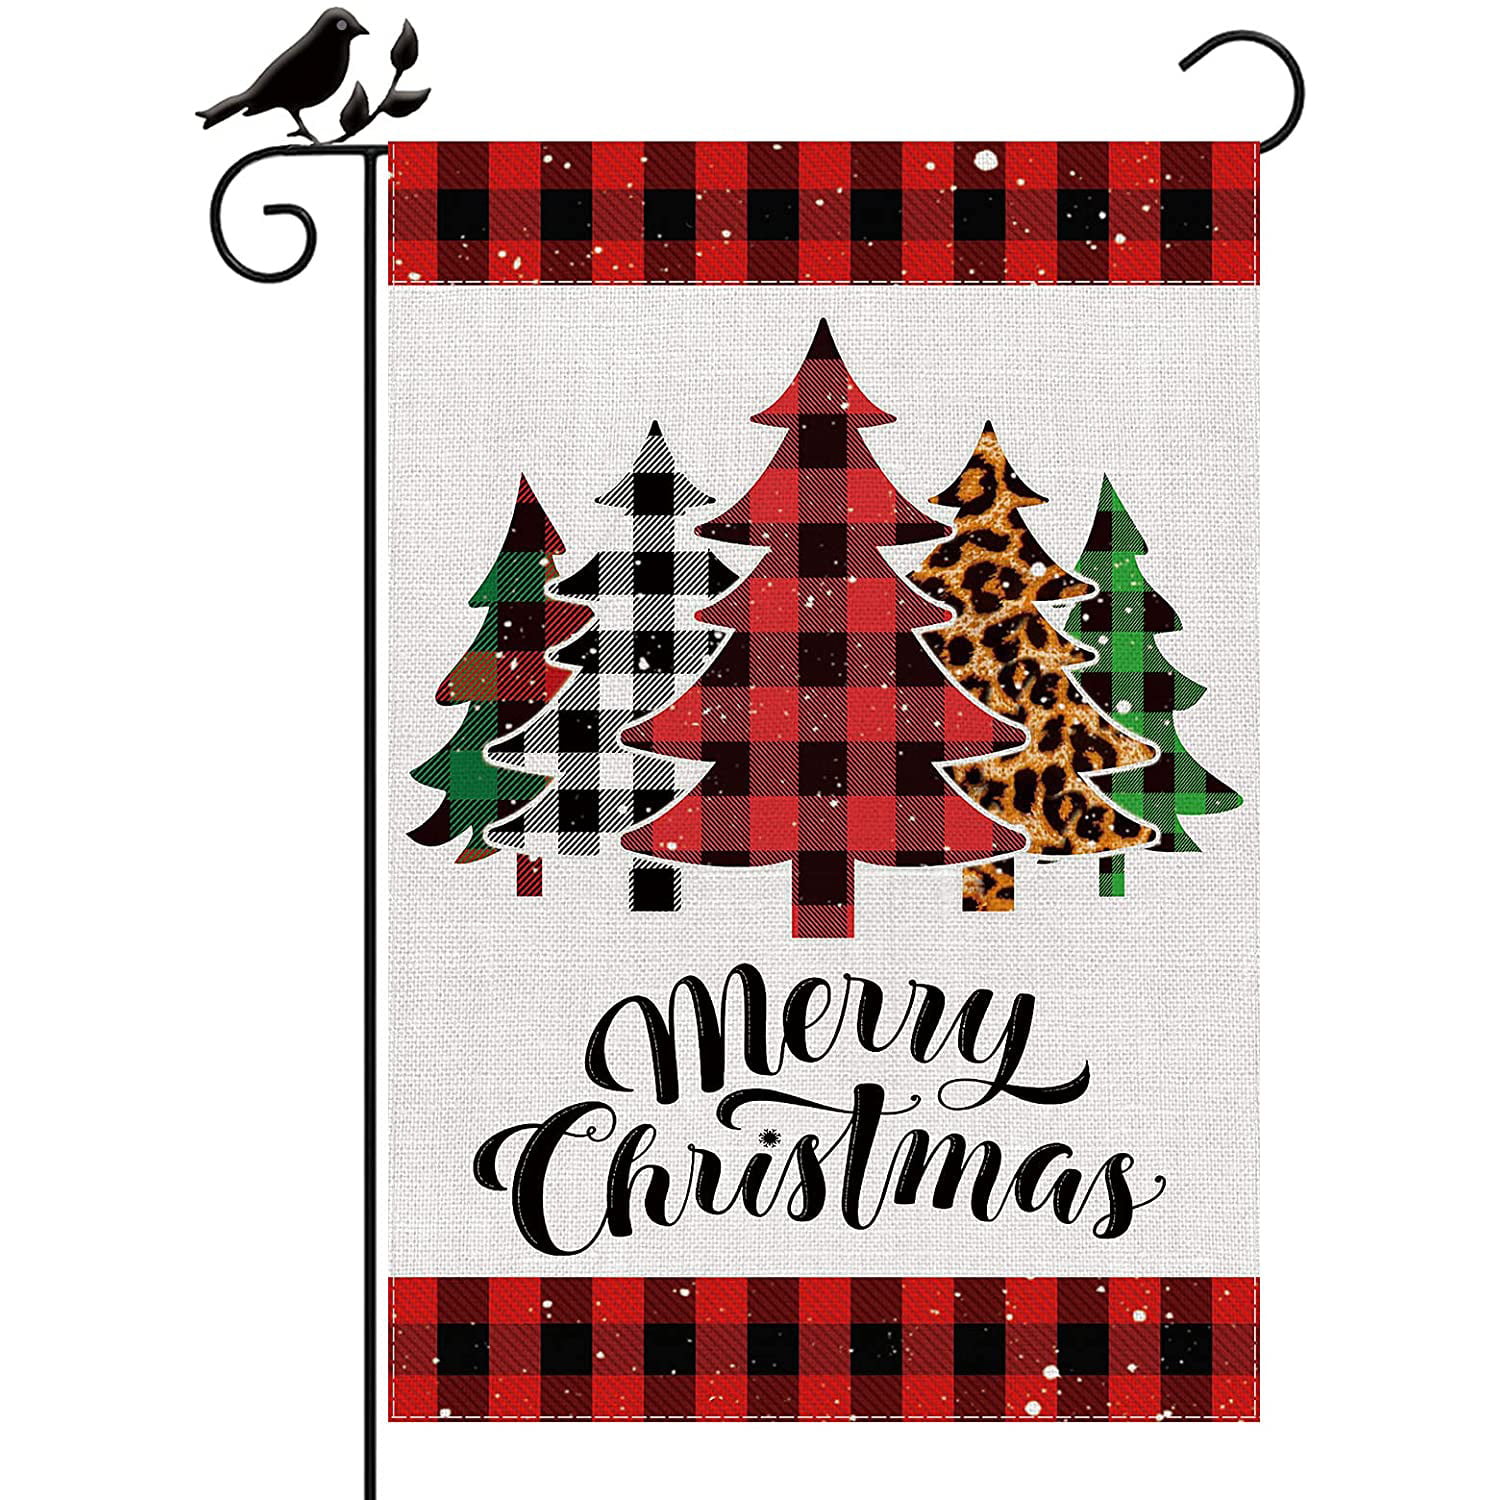 Winter Holiday Christmas Garden Flag Double Sided Snowman with Buffalo Plaid Scarf Yard Outdoor Decoration 12.5 x 18 Inch